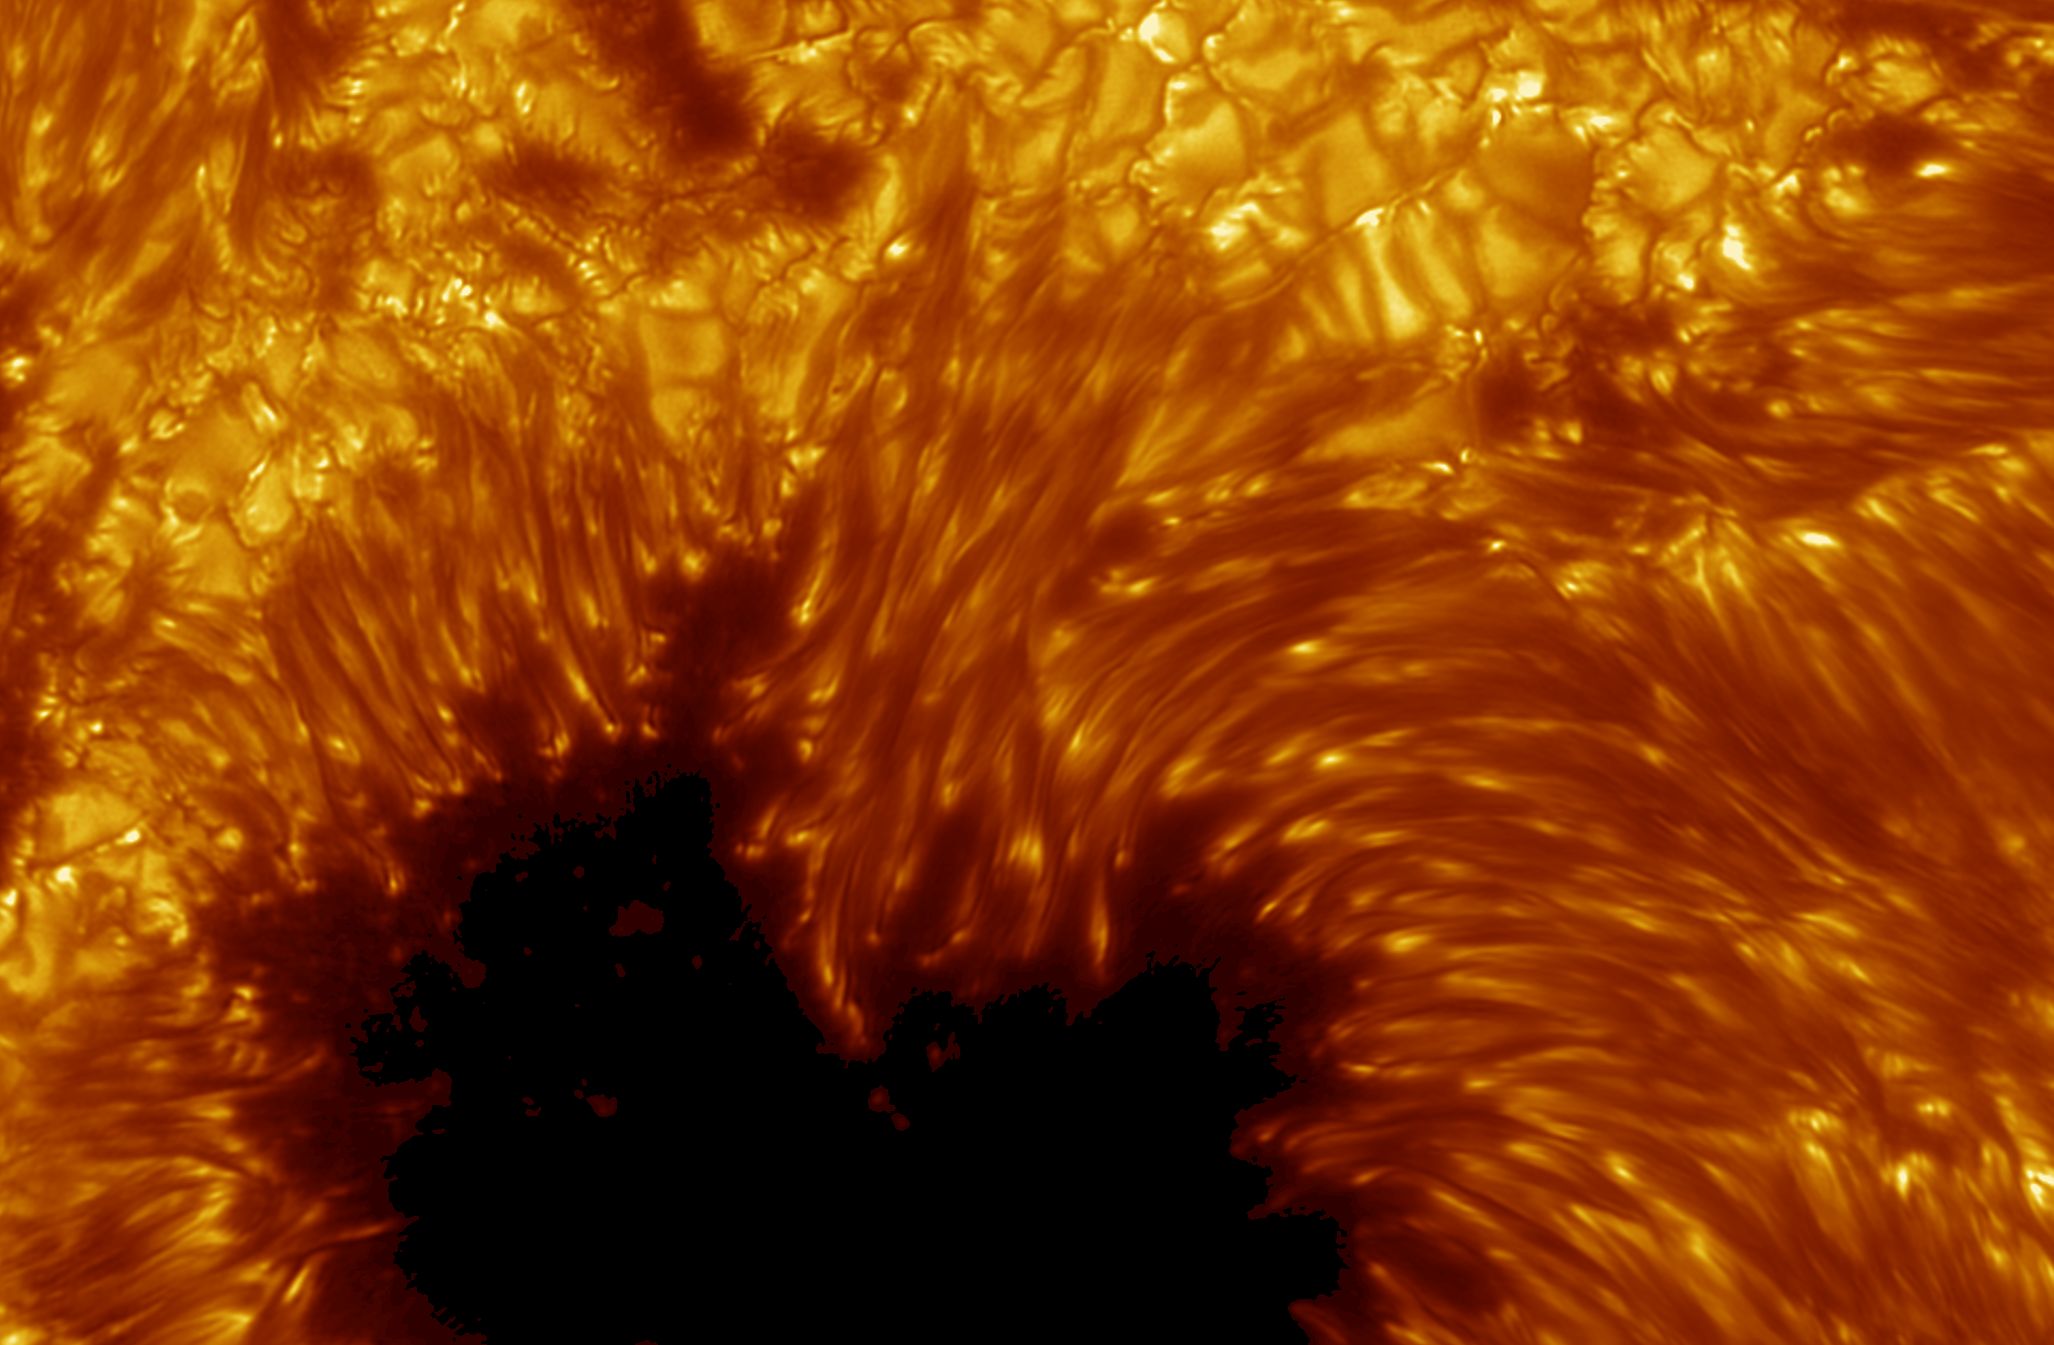 A Sharp View of the Sun